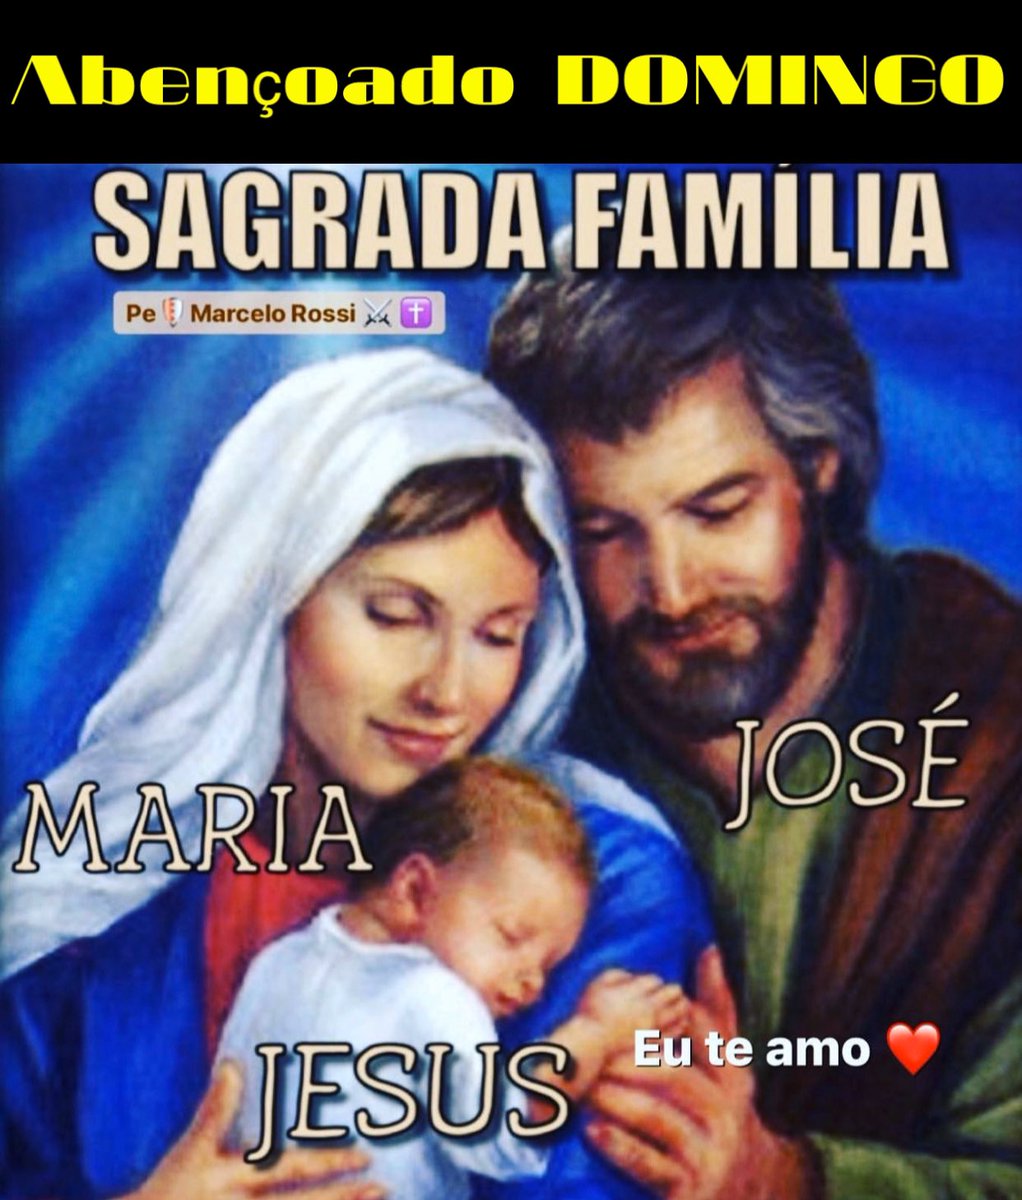 Twitter 上的 Padre Marcelo Rossi：